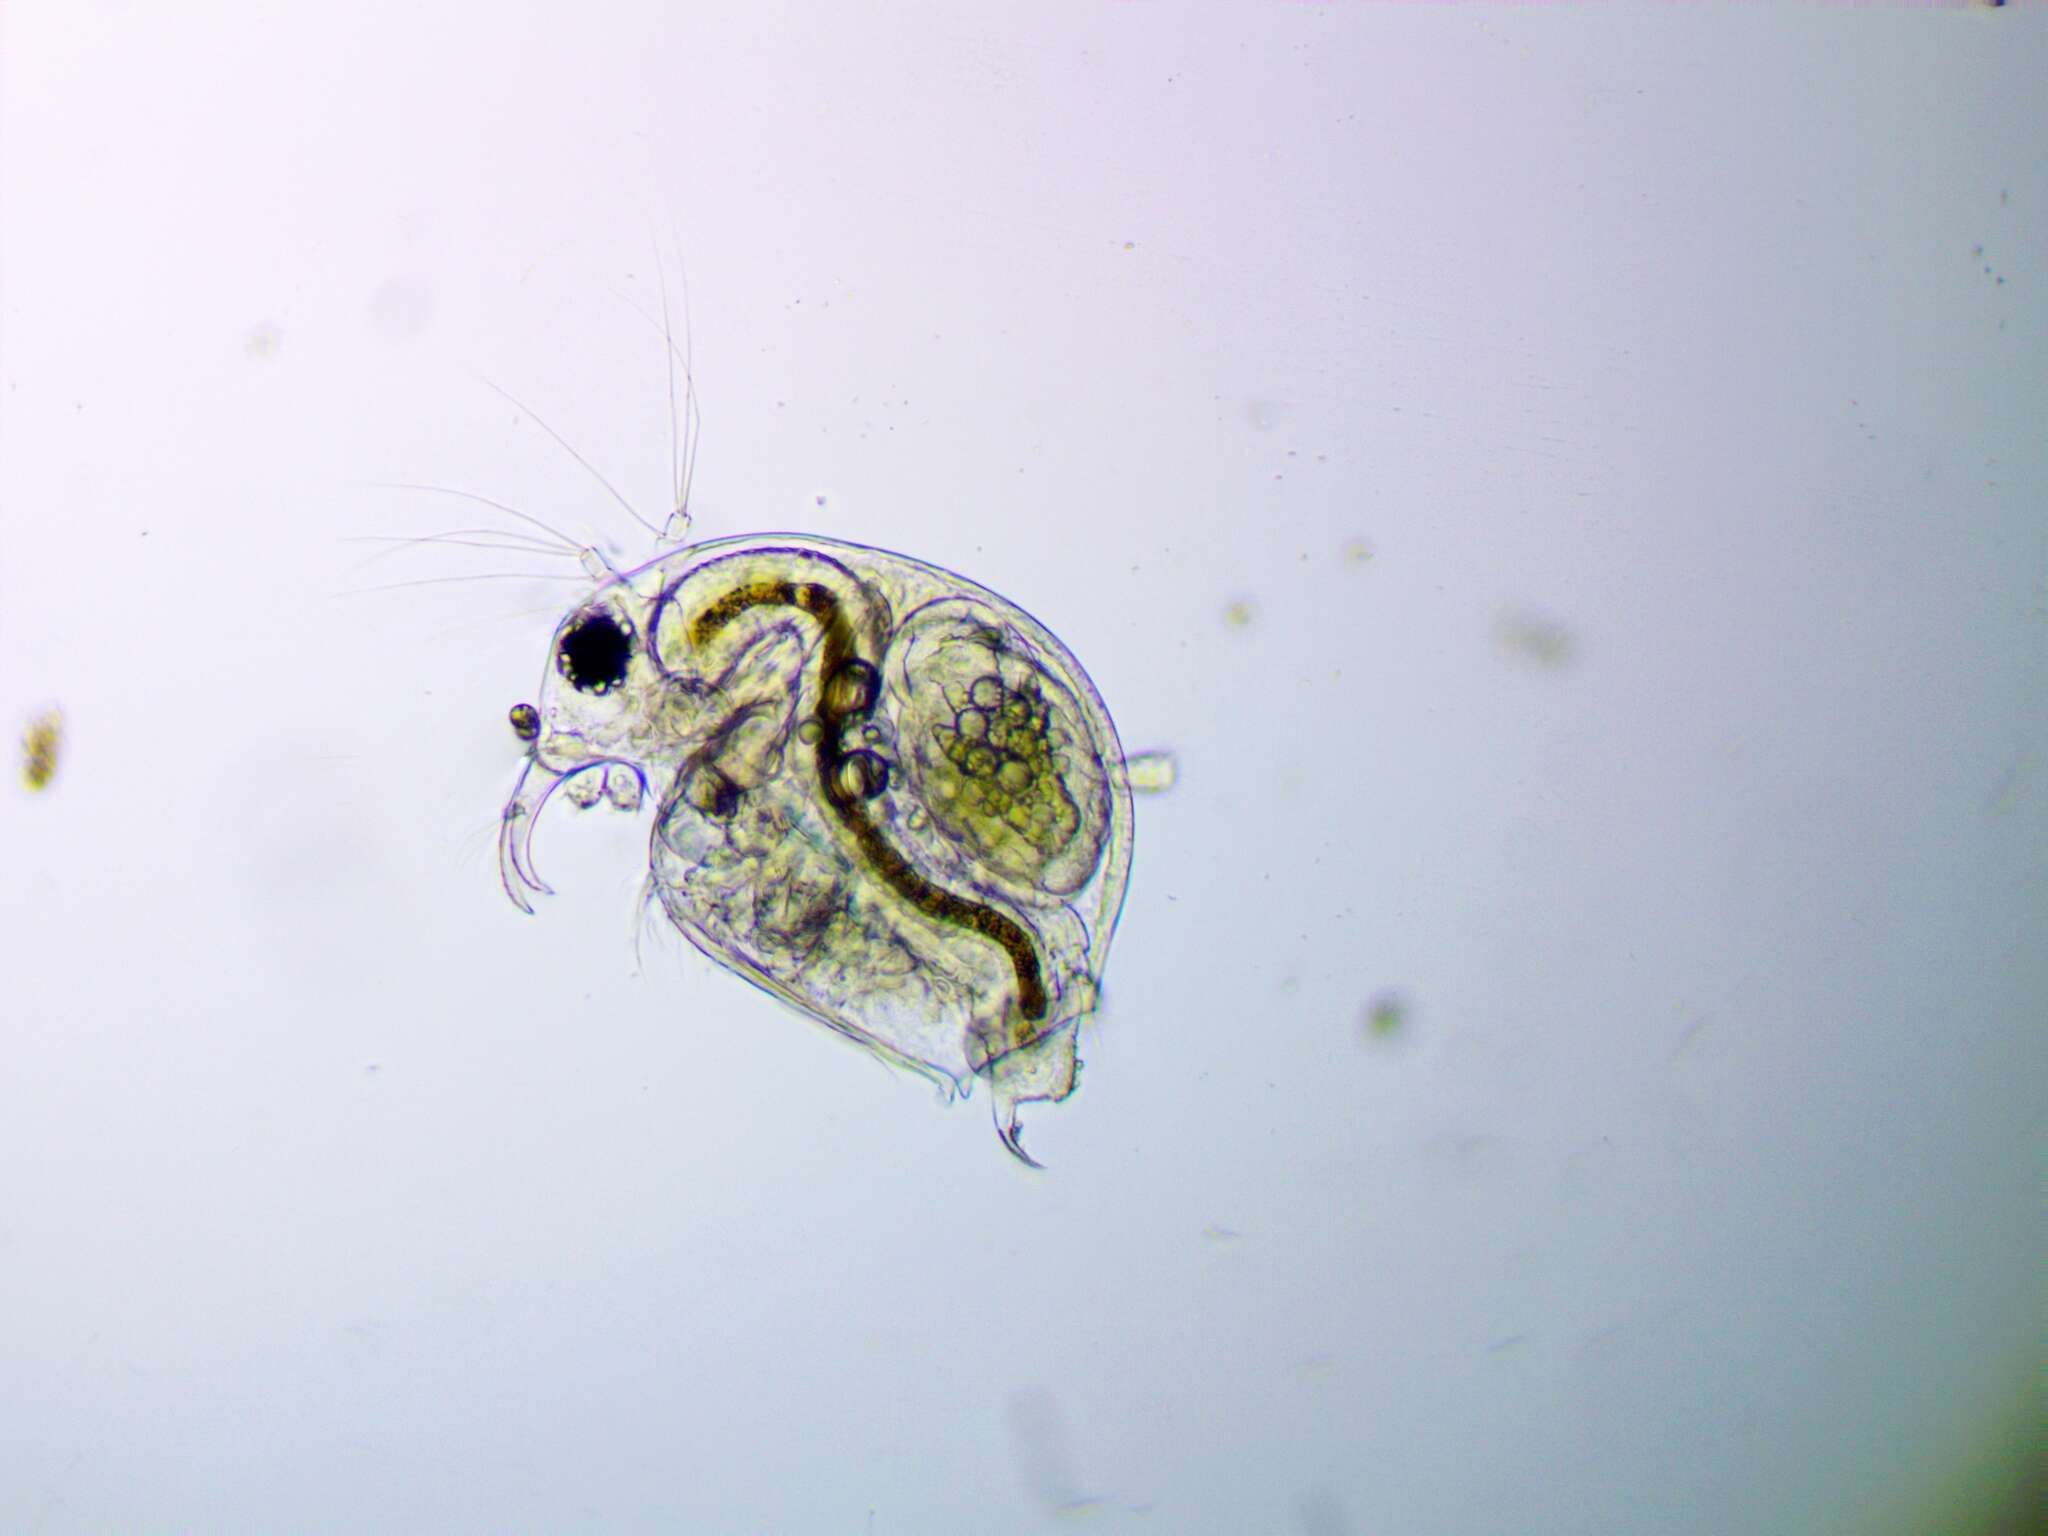 Image of common long-nosed waterflea